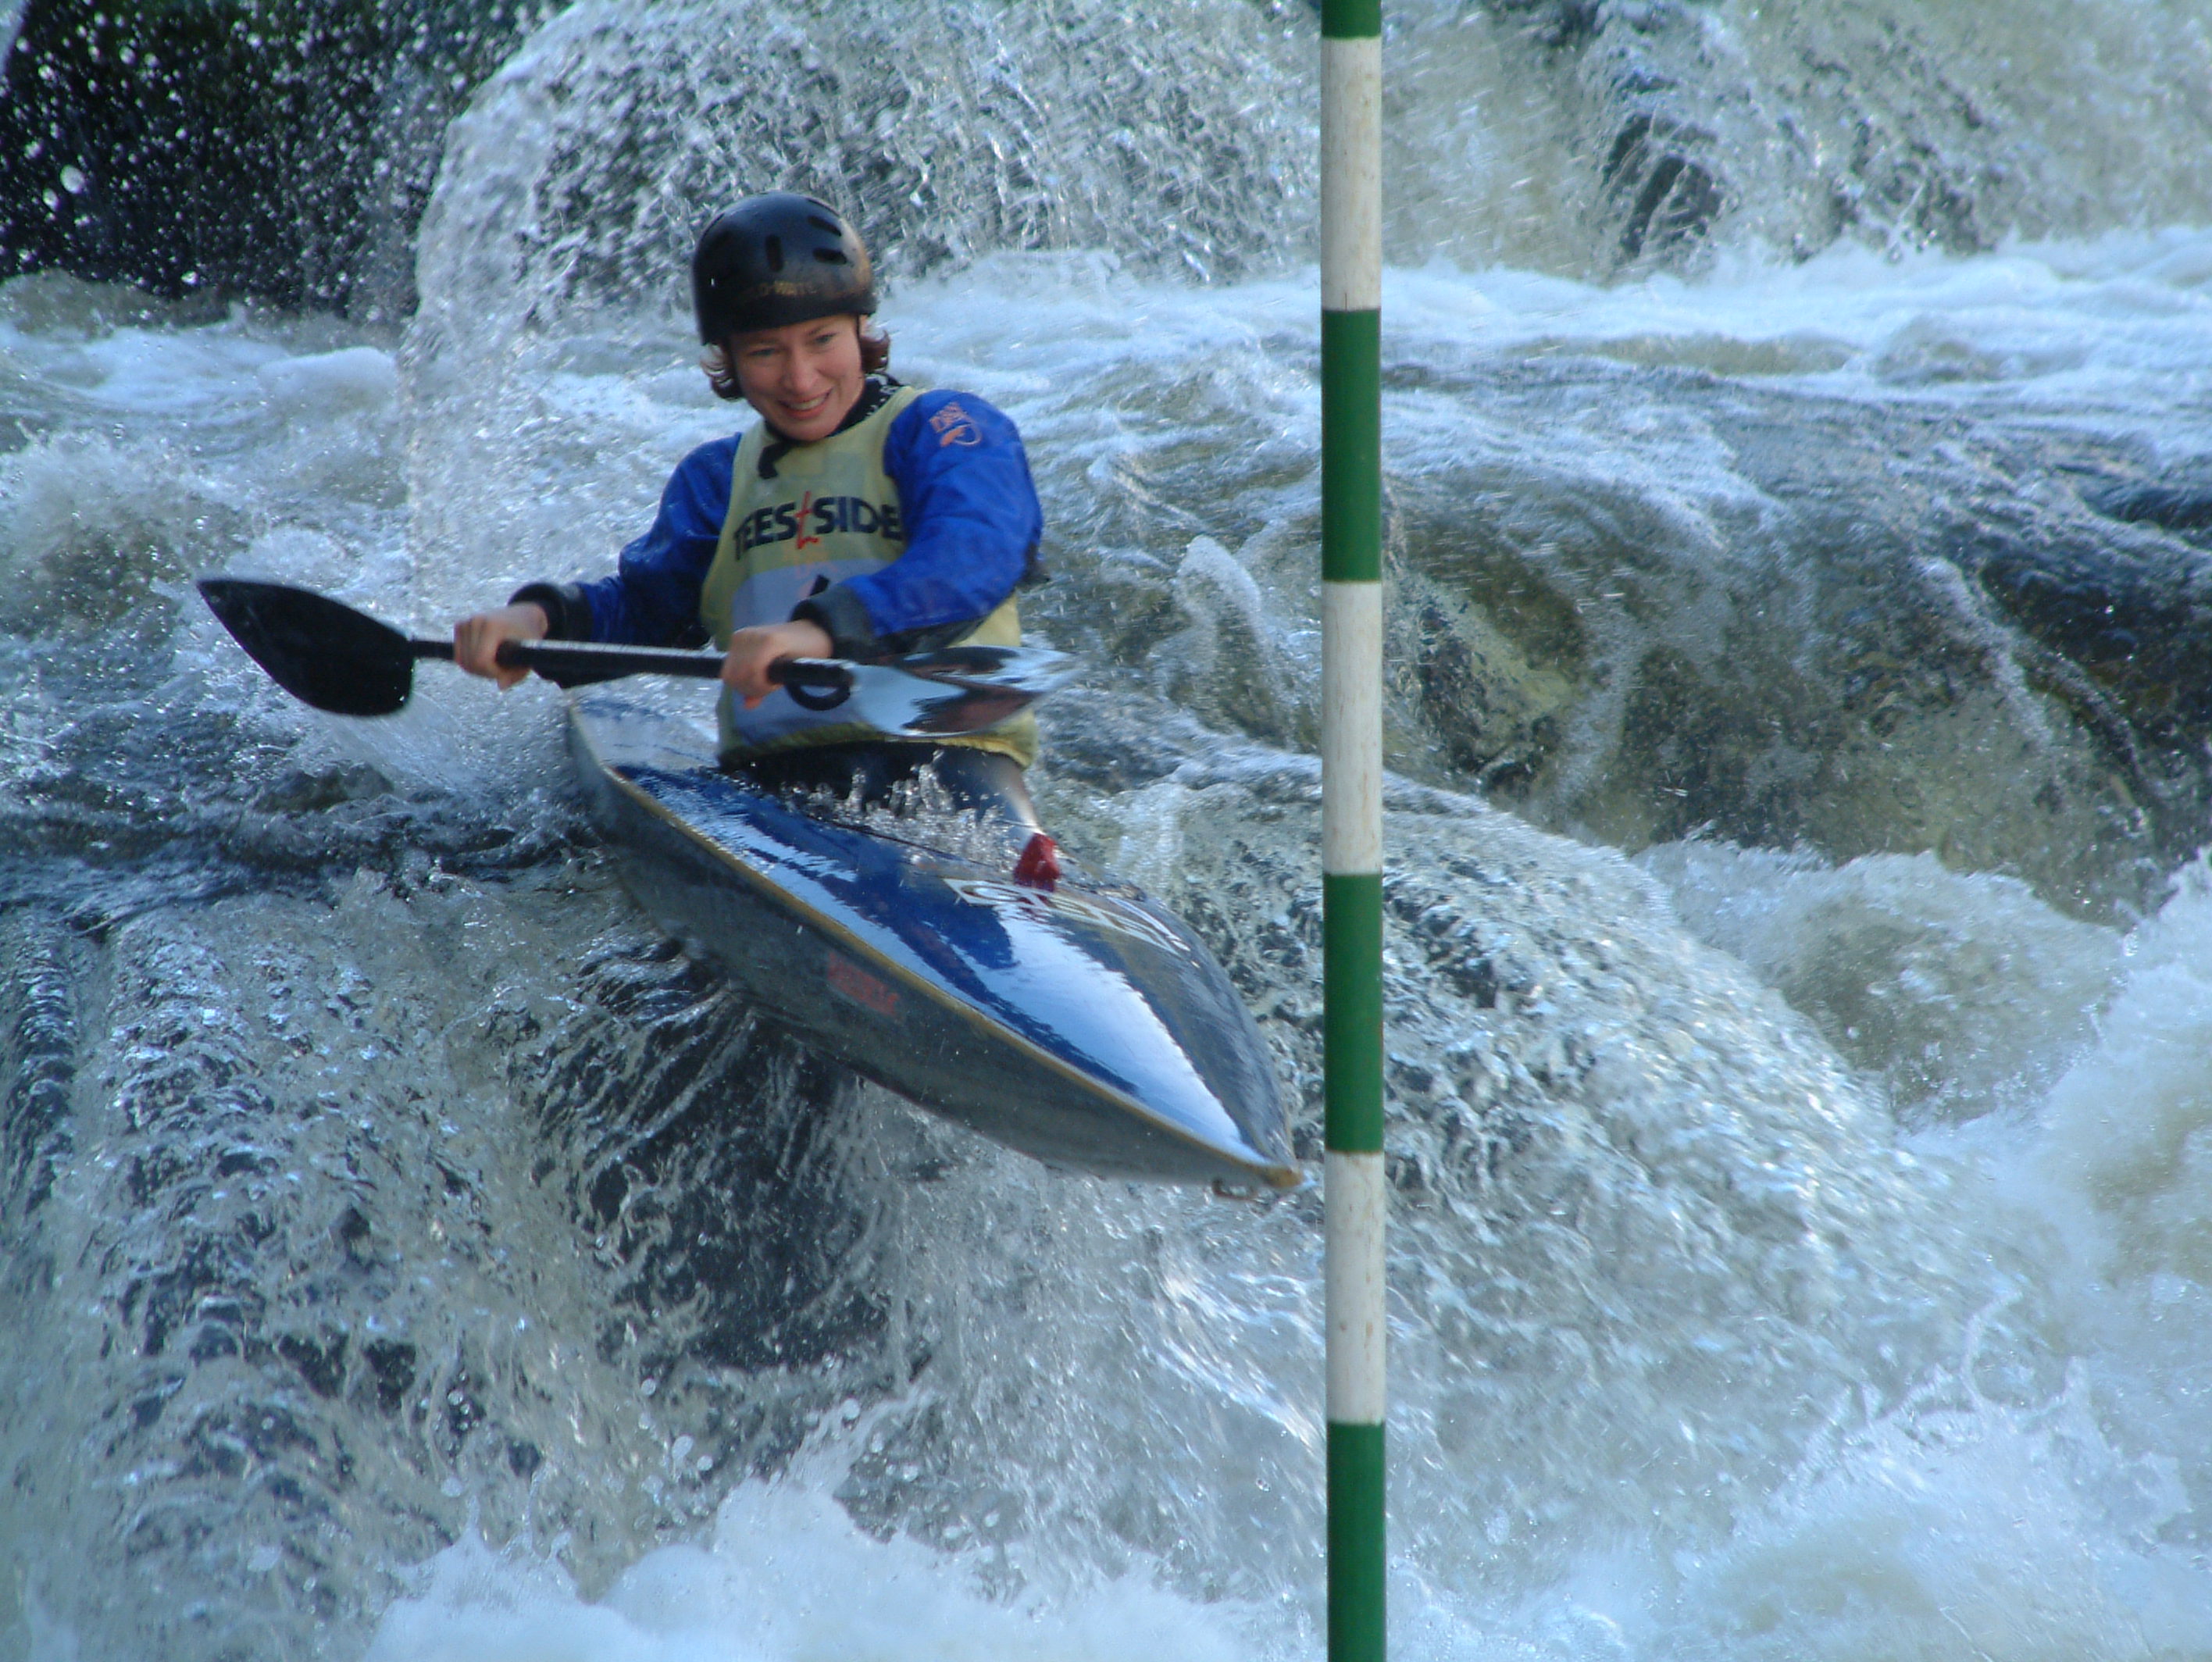 Helen Cardy in action at Llangollen - 2001